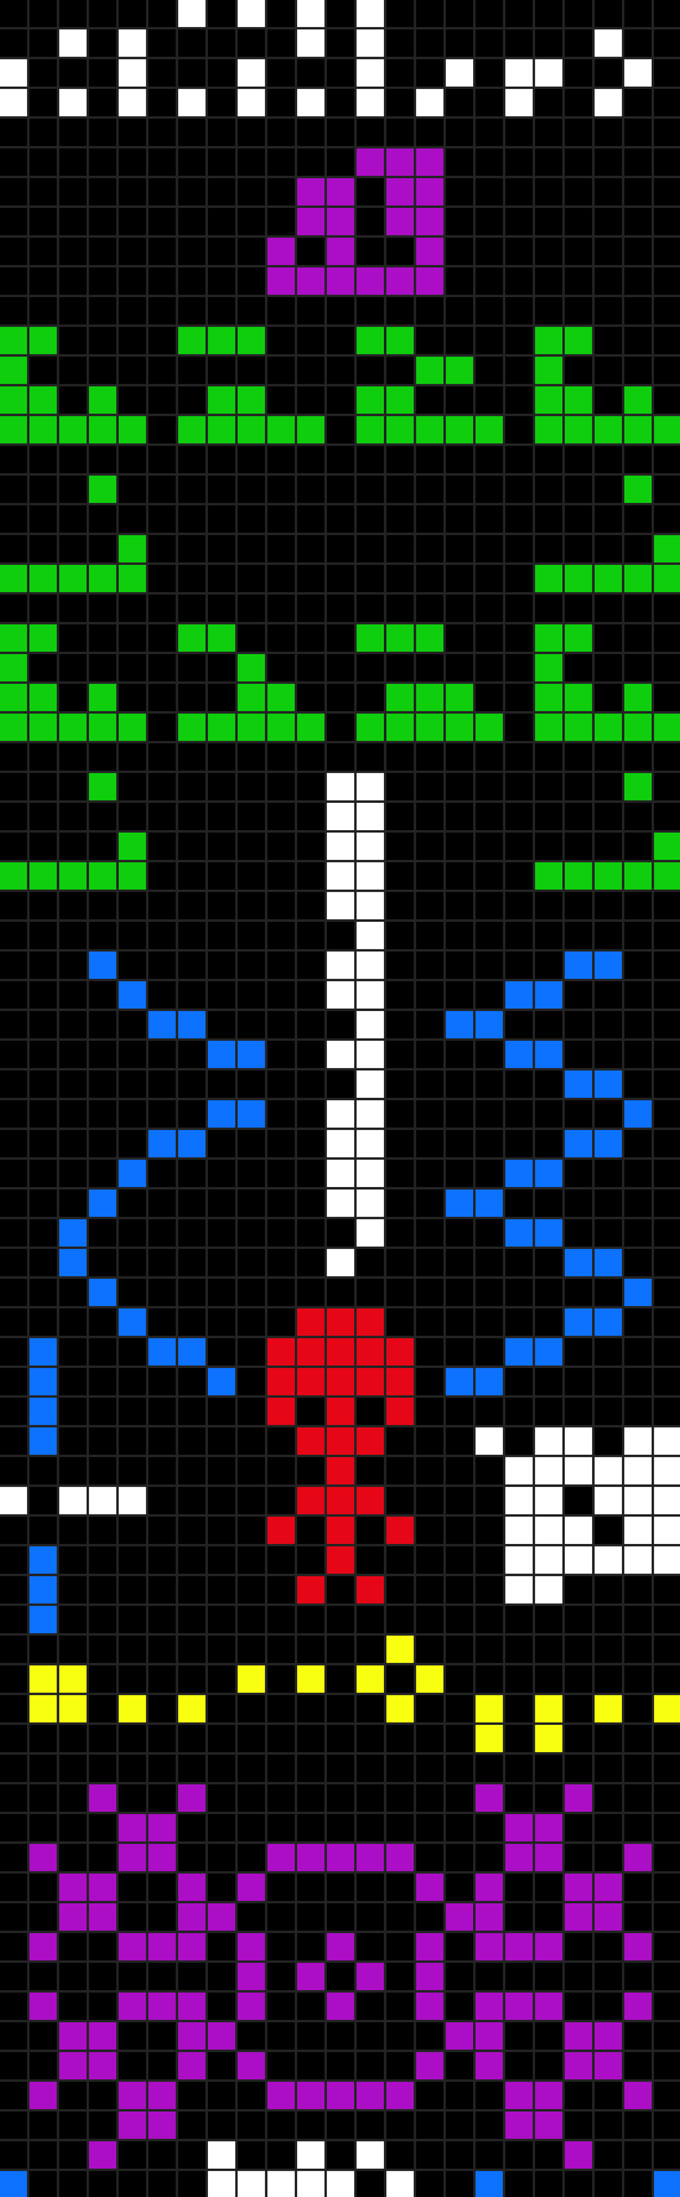 A vertical image that shows the Arecibo message. The image is several different colored tiny squares grouped together on a black background.